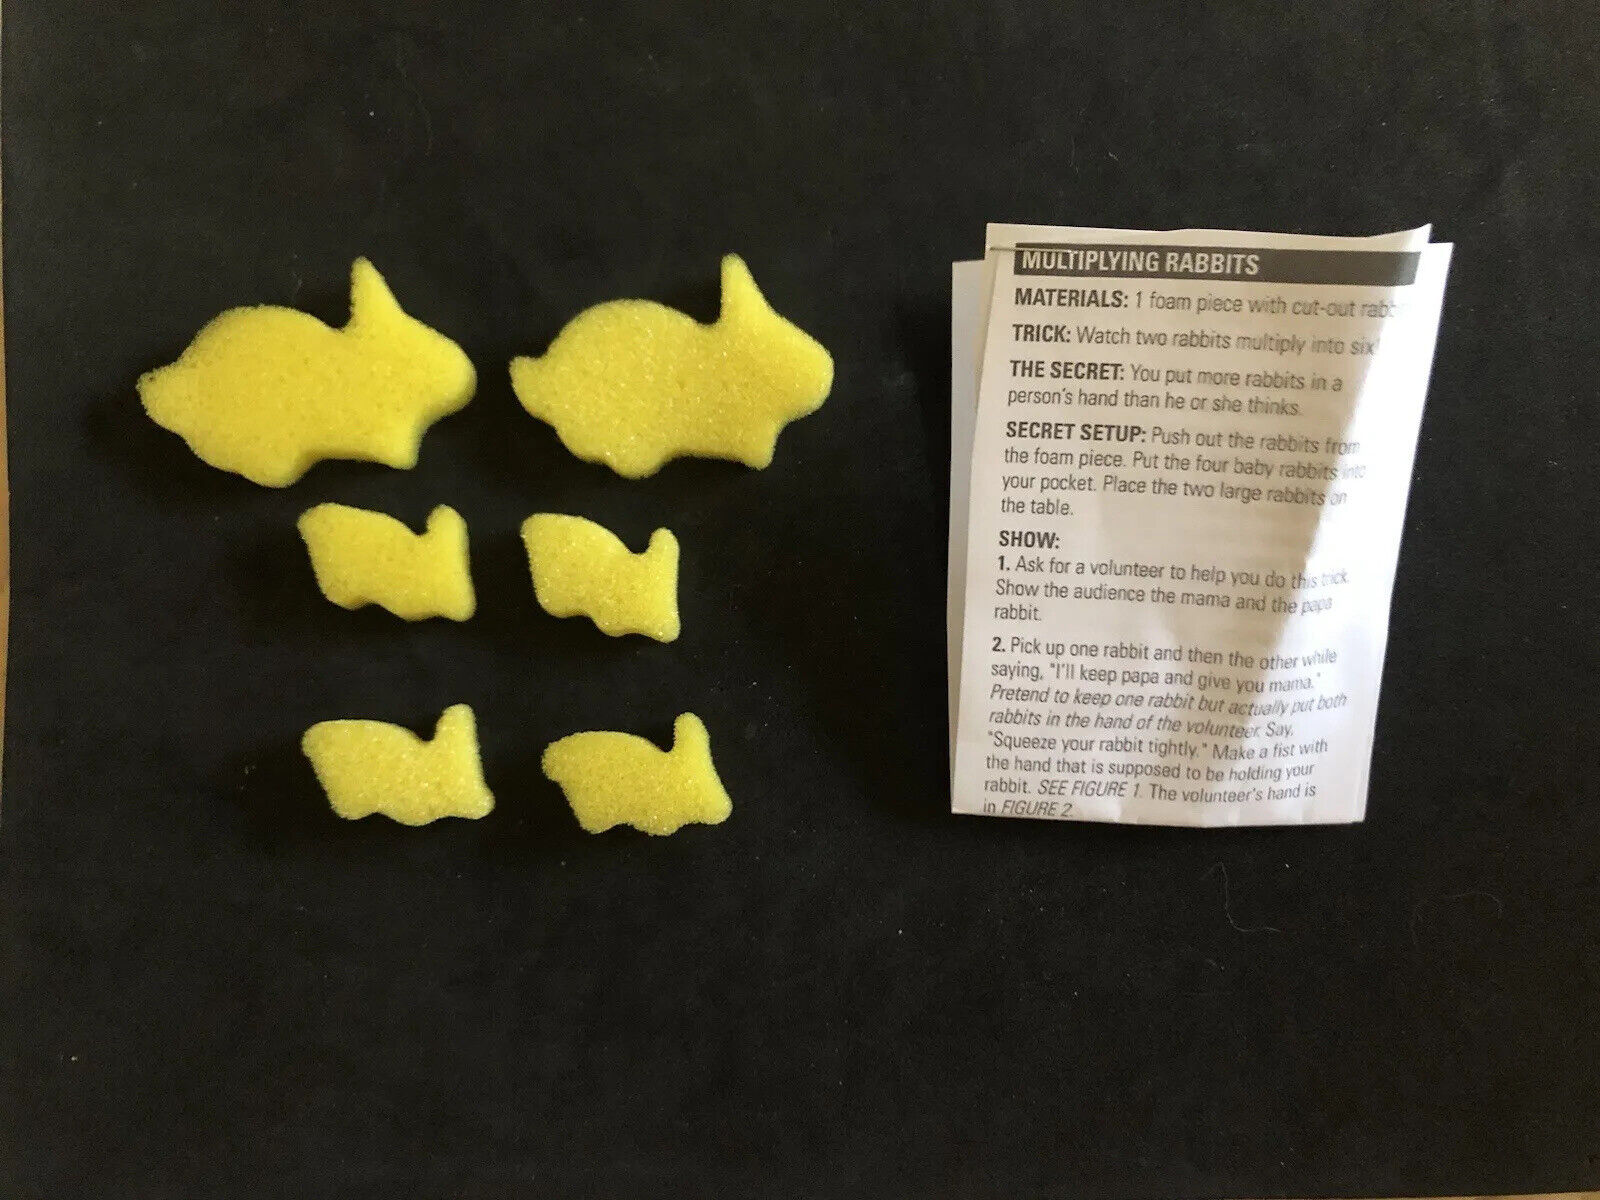 Multiplying Rabbits Magic Trick - New with Printed Instructions